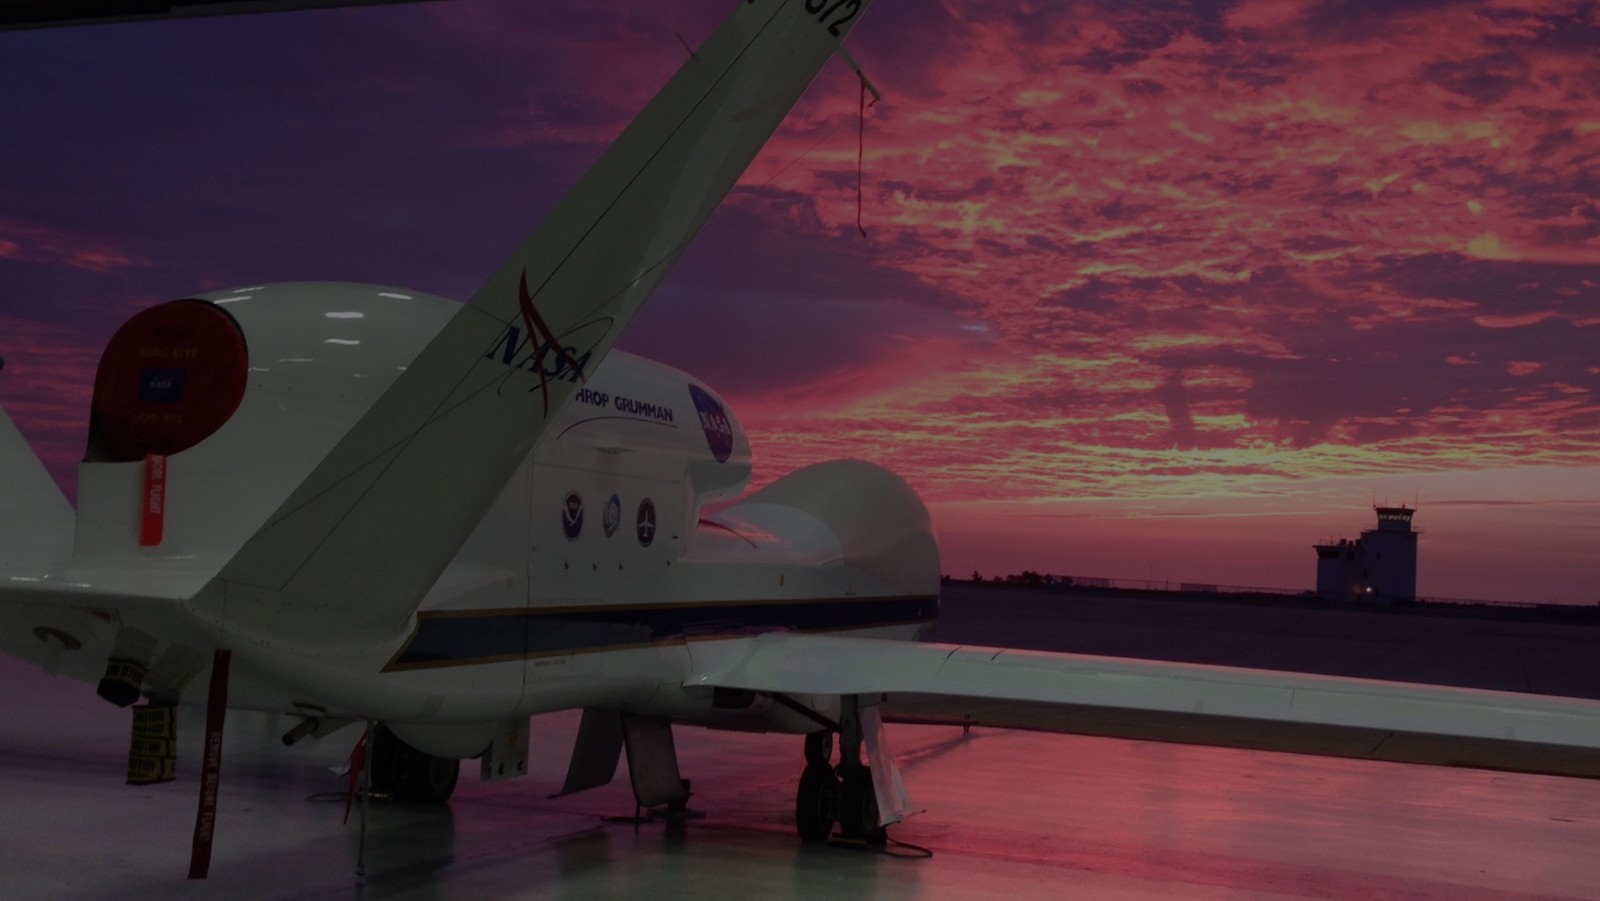 Photo of the NASA Global Hawk in the hangar going out into a bright pink sunset. Photo Credit, NOAA.